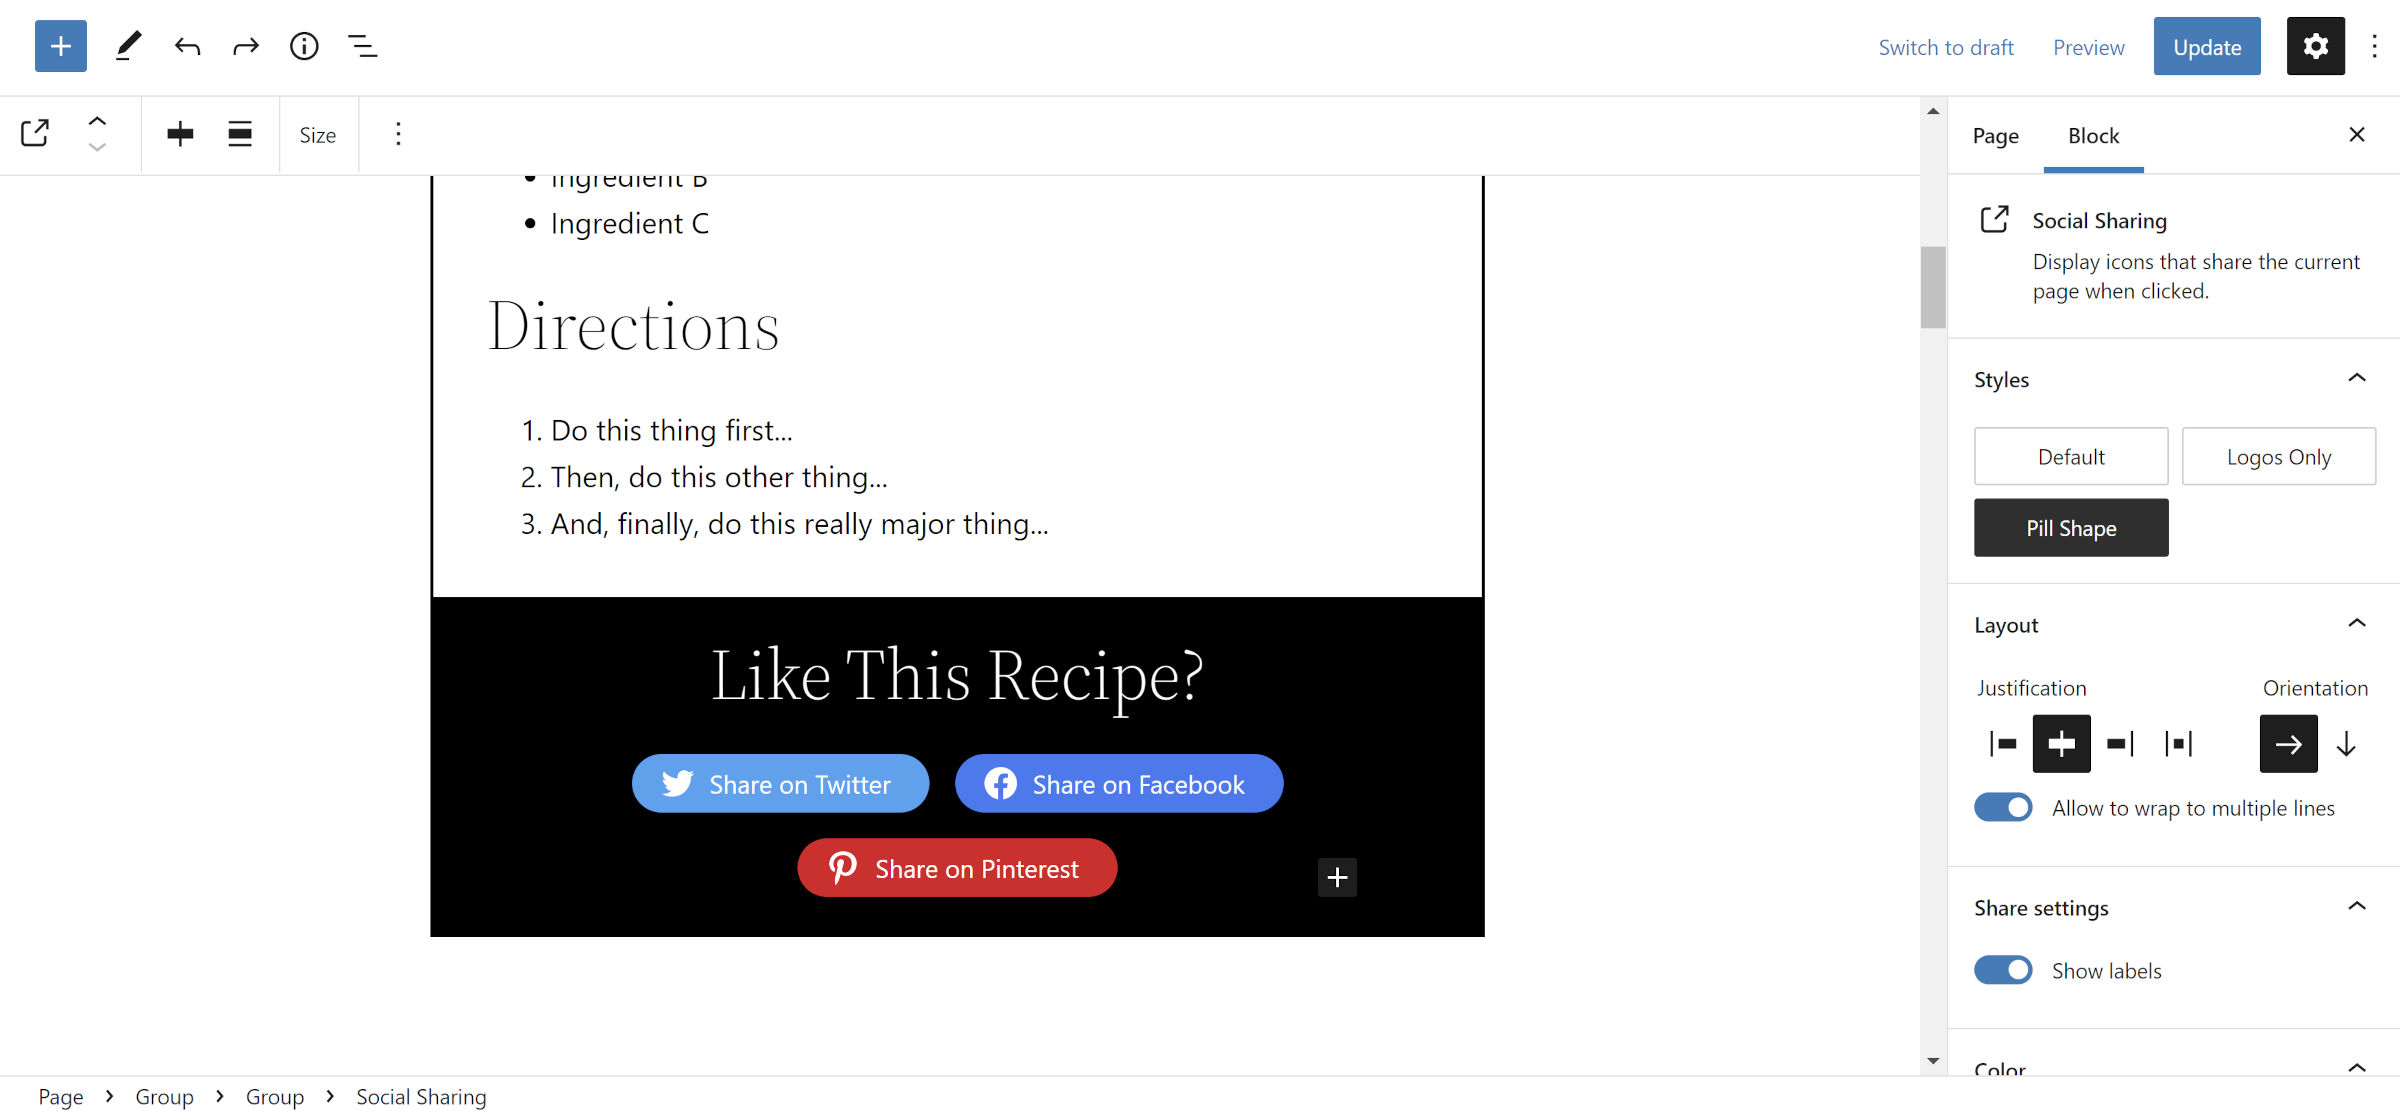 Recipe card in the WordPress editor.  Shown ins the directions list, followed by a social sharing section.